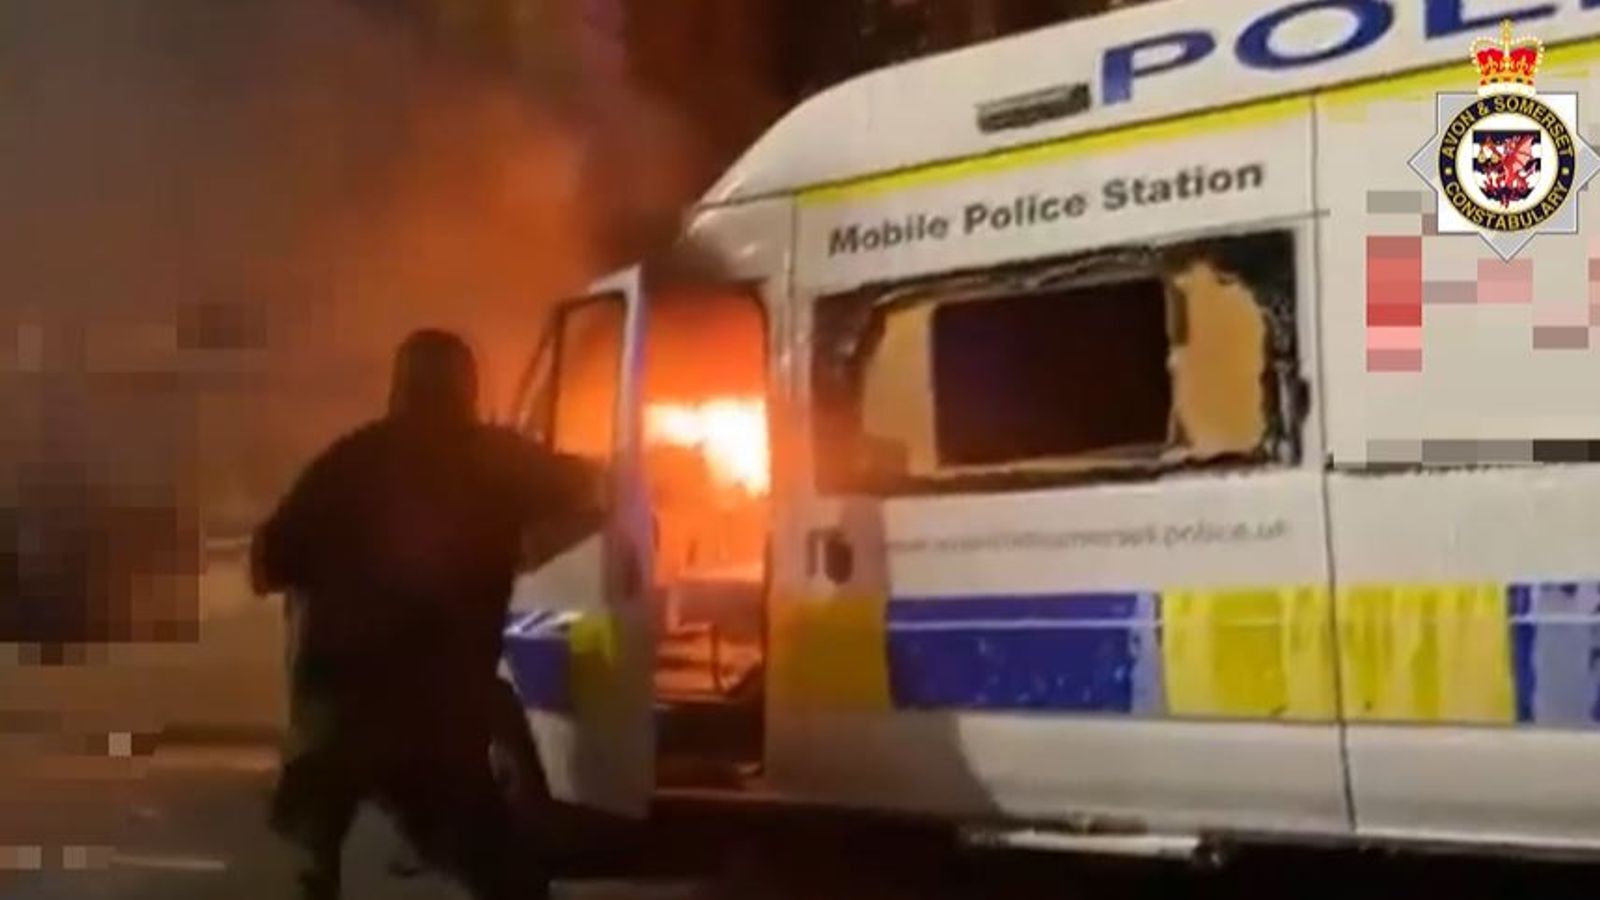 Bristol man jailed after setting fire to mobile police station during protests